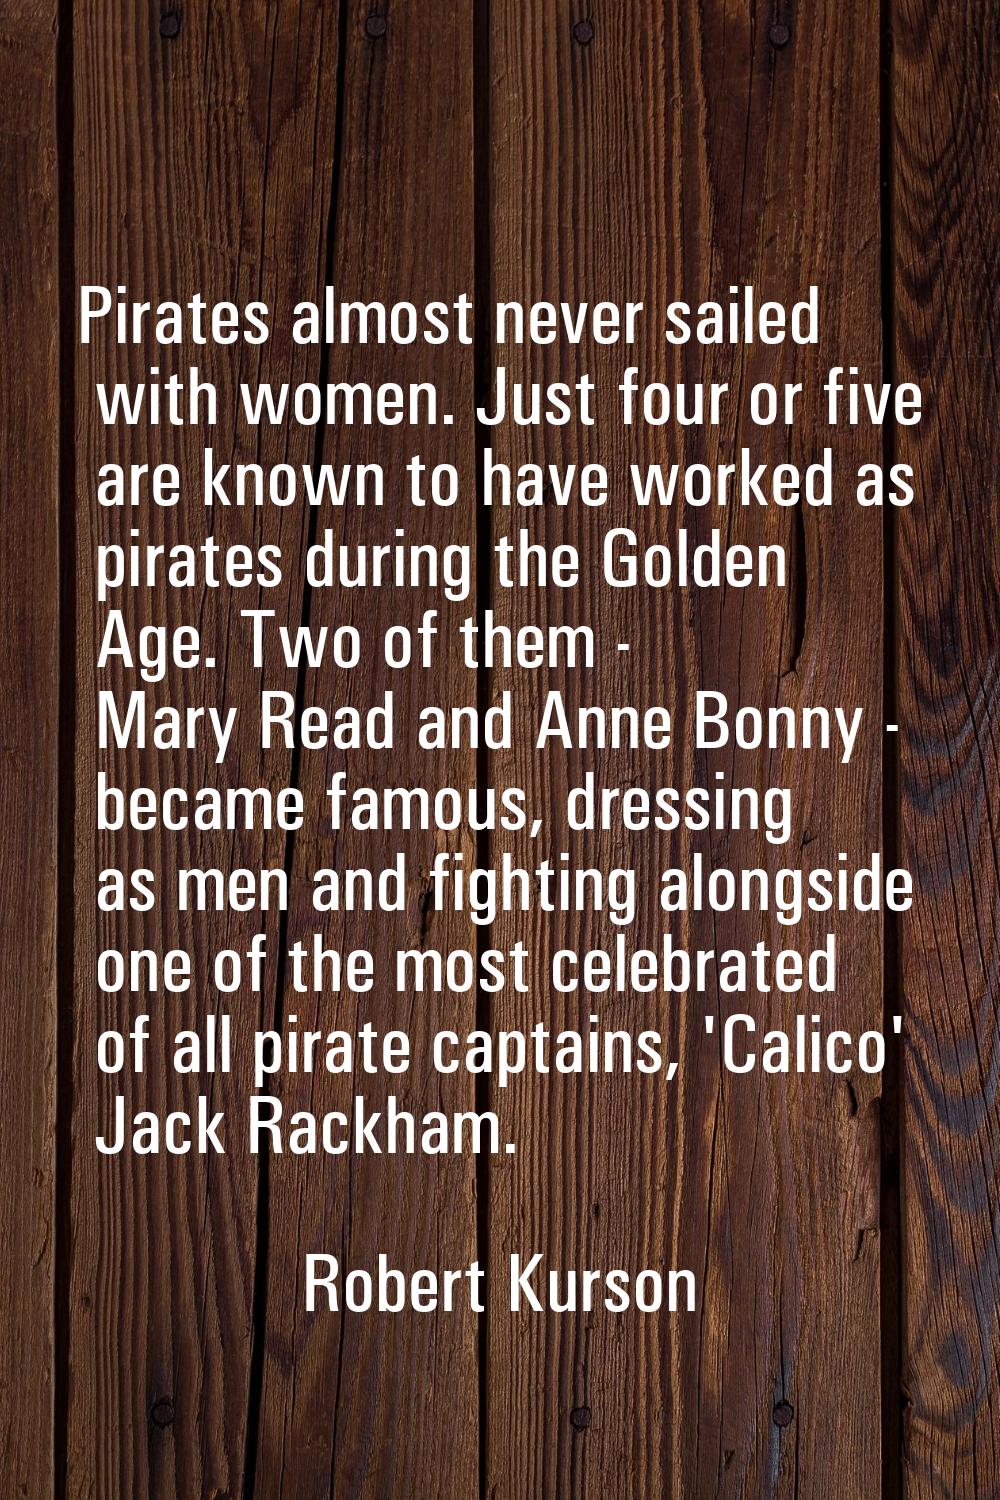 Pirates almost never sailed with women. Just four or five are known to have worked as pirates durin